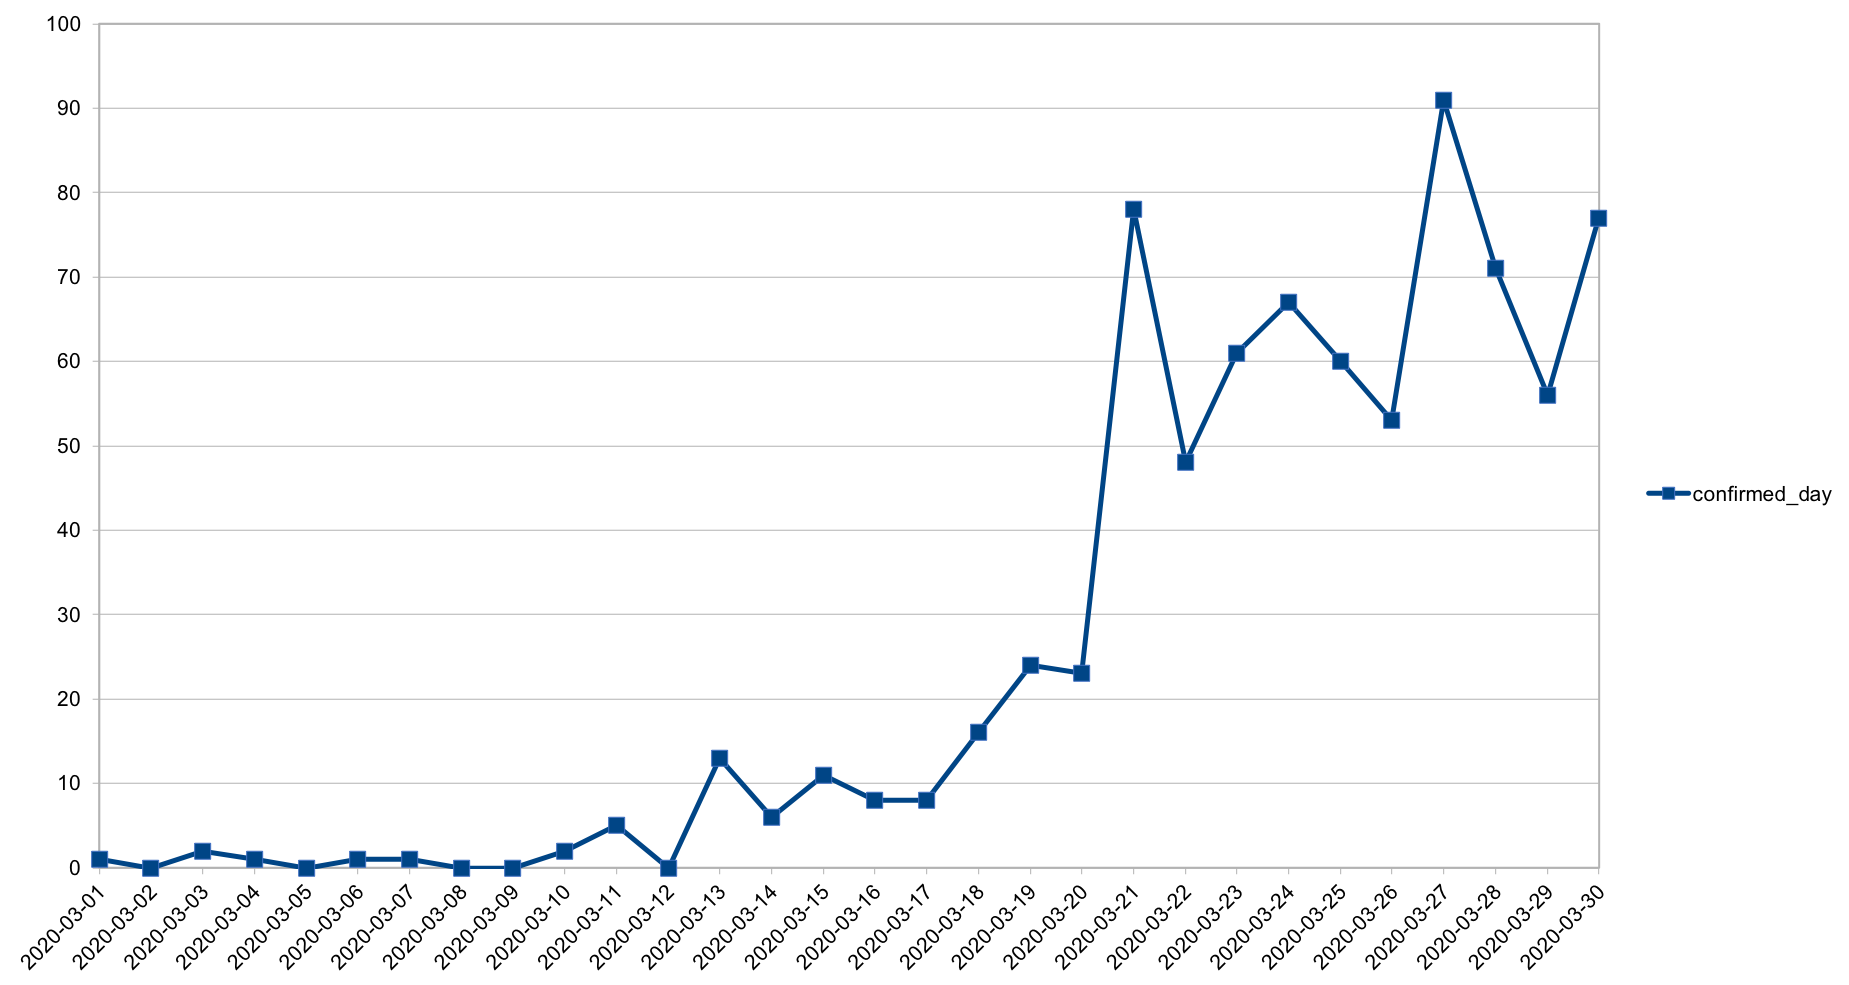 The chart representing number of new positive cases